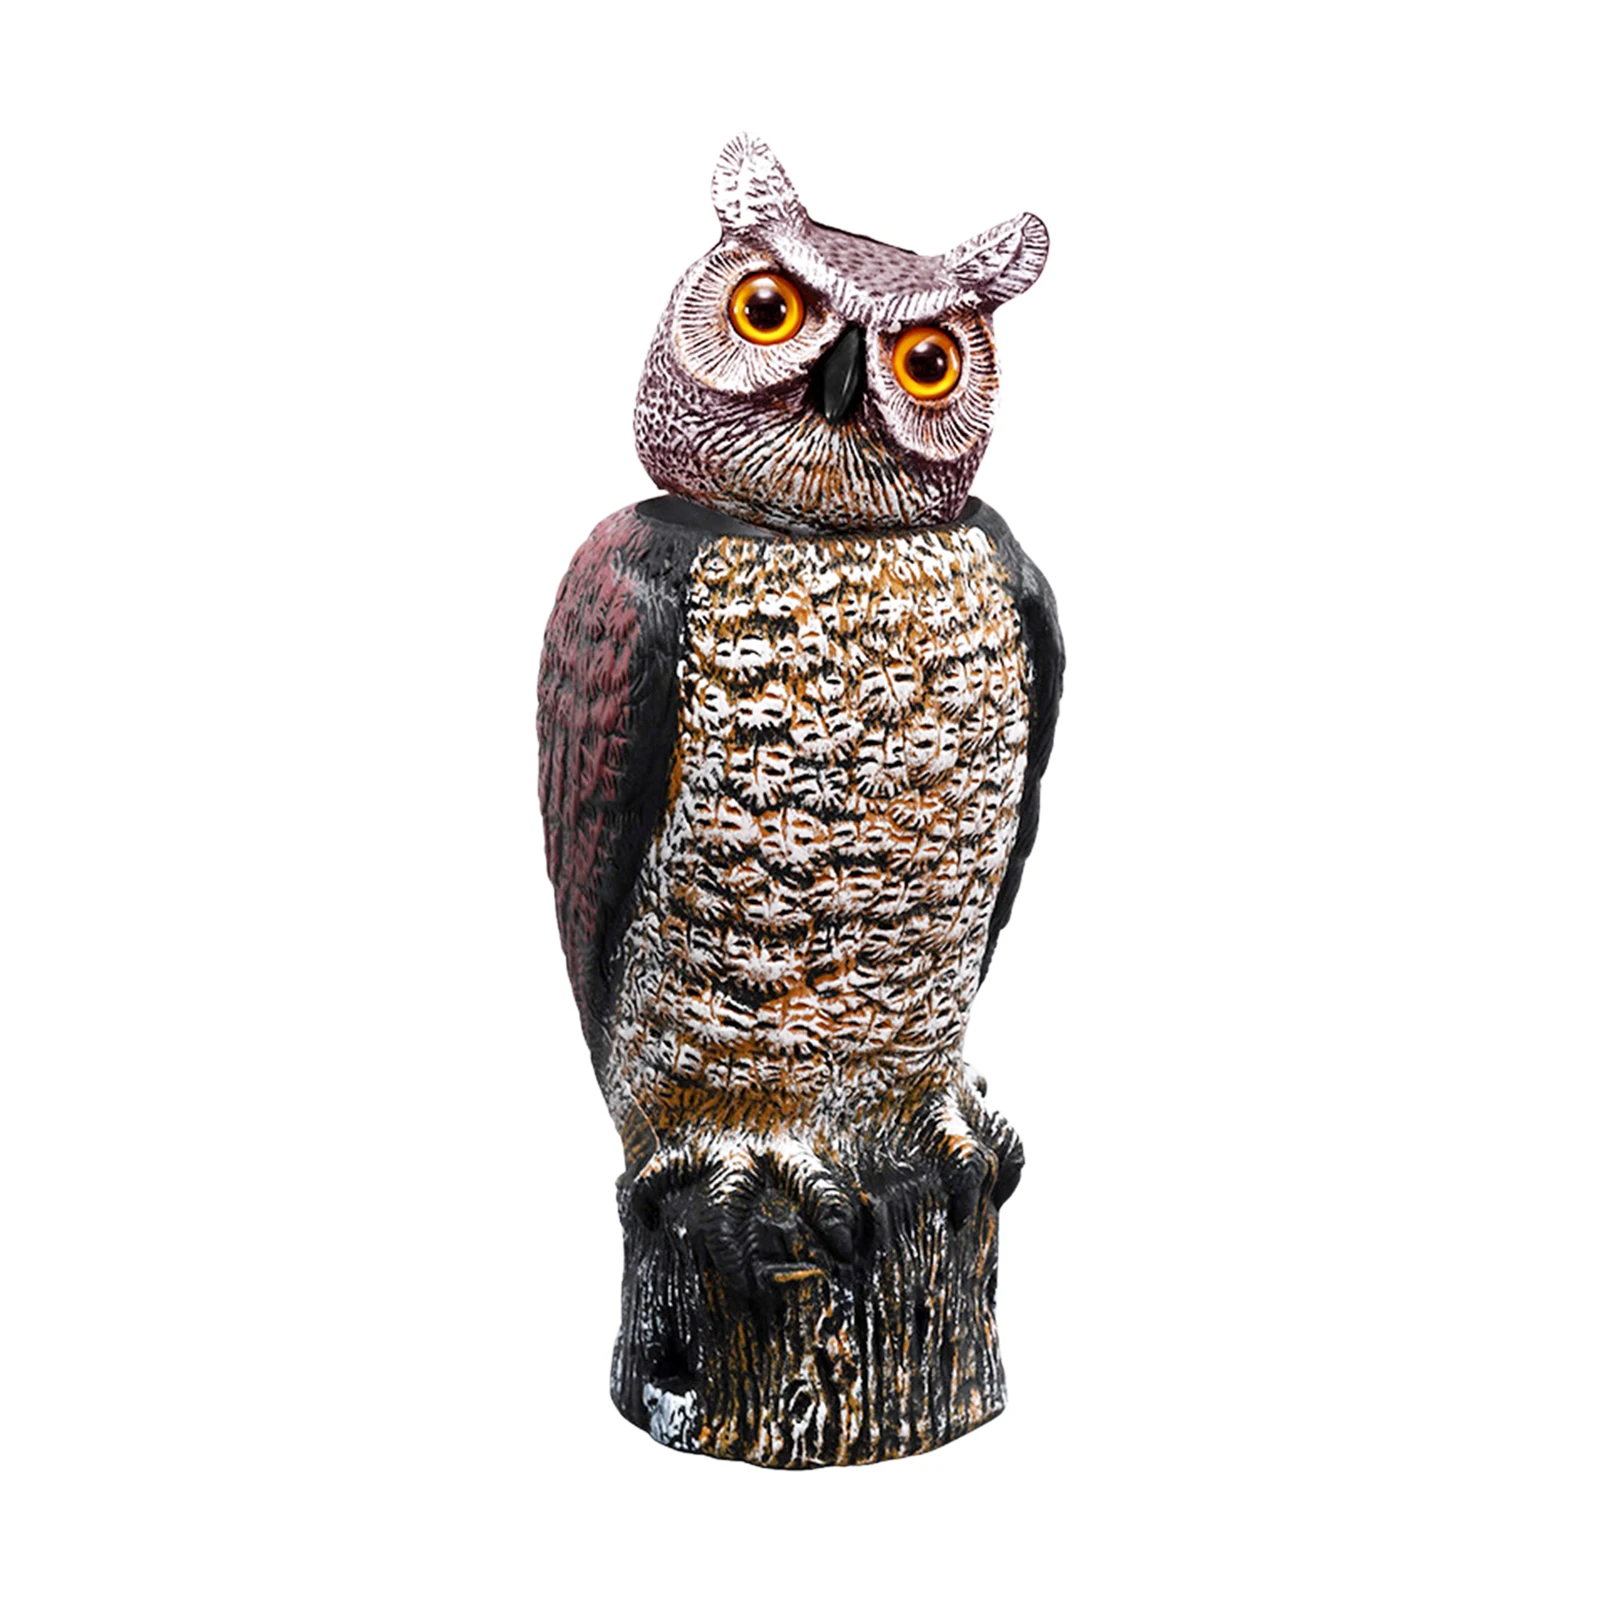 Handpainted Owl Decoy Statue with Rotating Head Bird Crow Scarer Scarecrow 18inch Tall